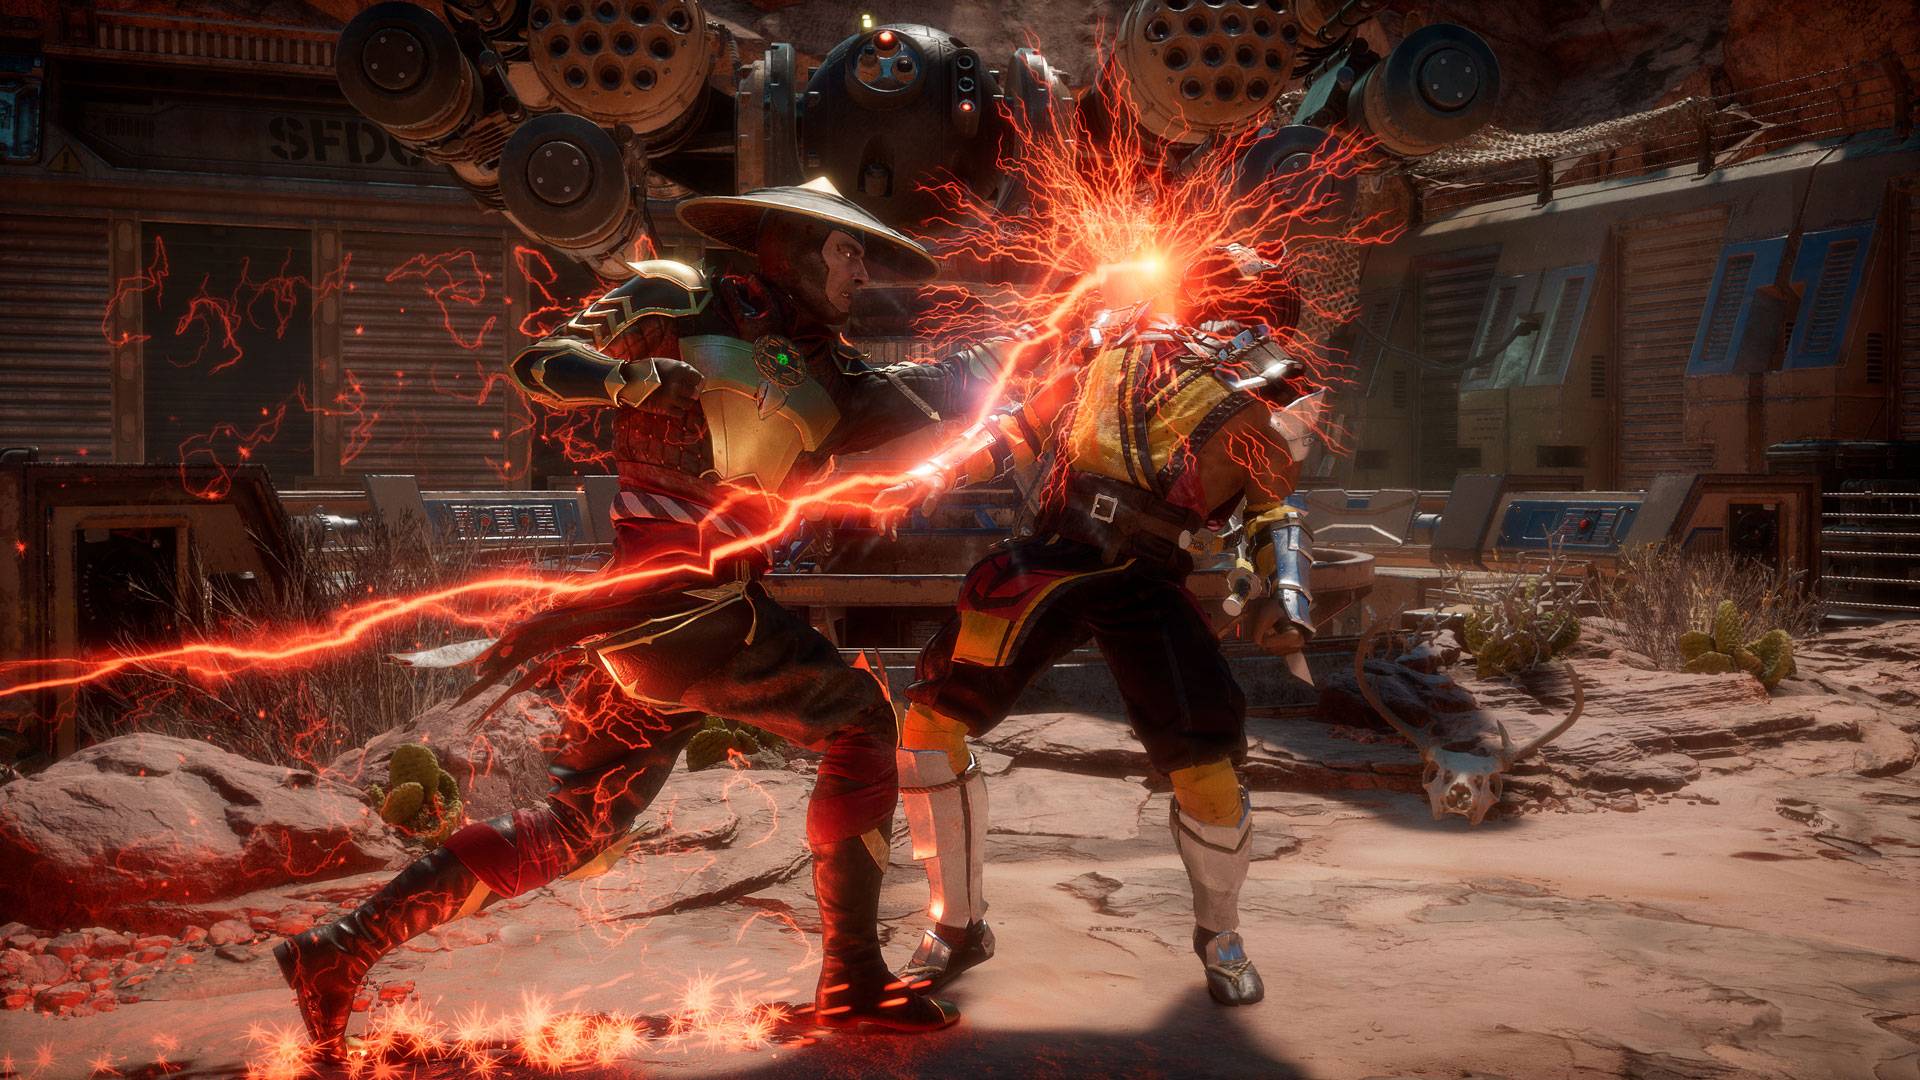 Raiden from Mortal Kombat uppercuts an oppenent, as red sparks fly out of his hand with the power of his punch